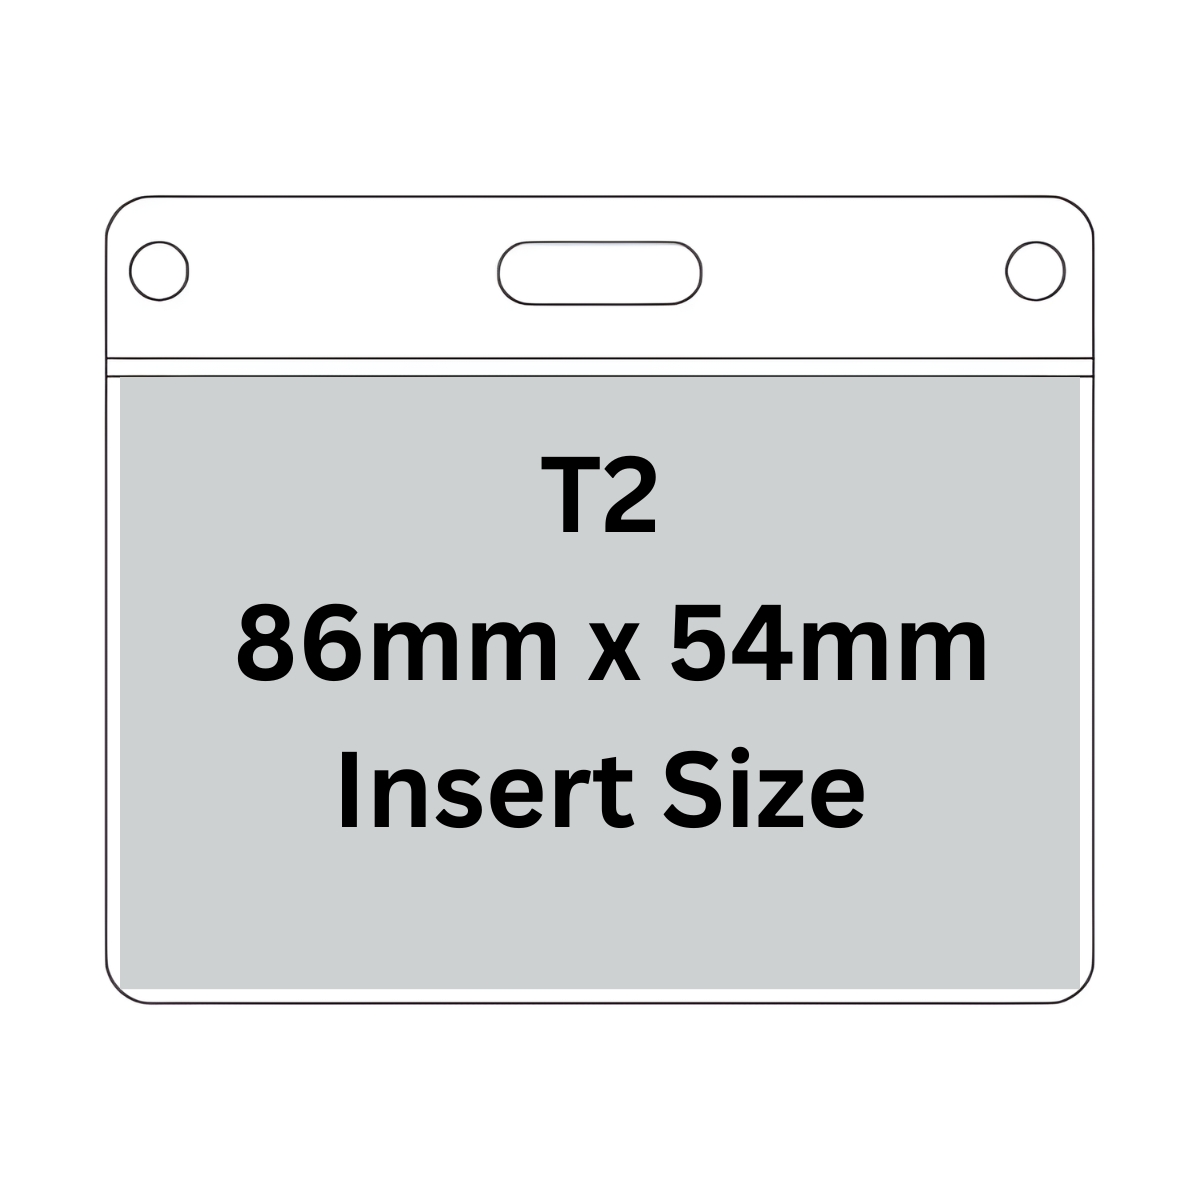 T2- credit card size- 86mm x 54mm